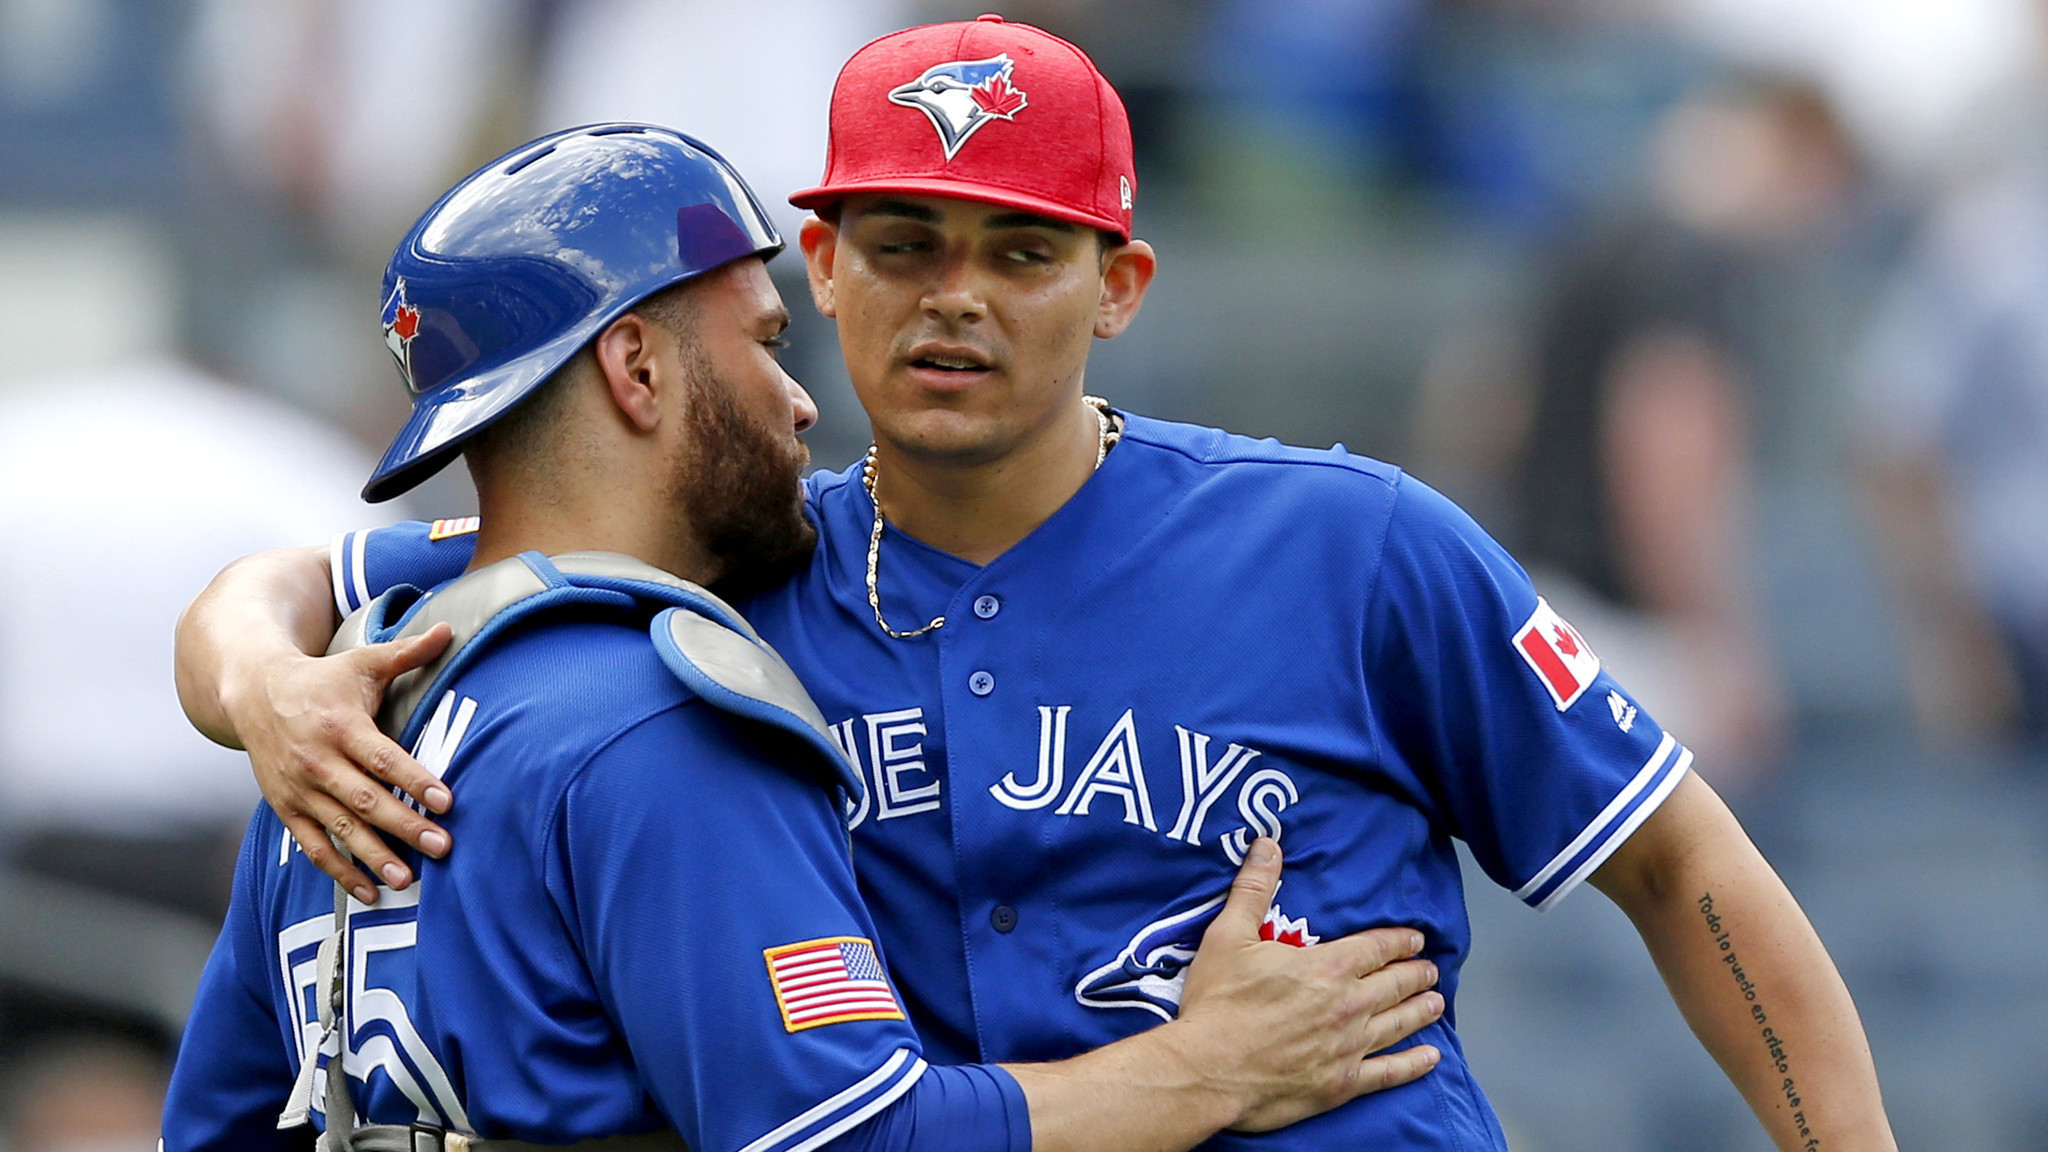 Roberto Osuna is in a better place after openly discussing anxiety issues